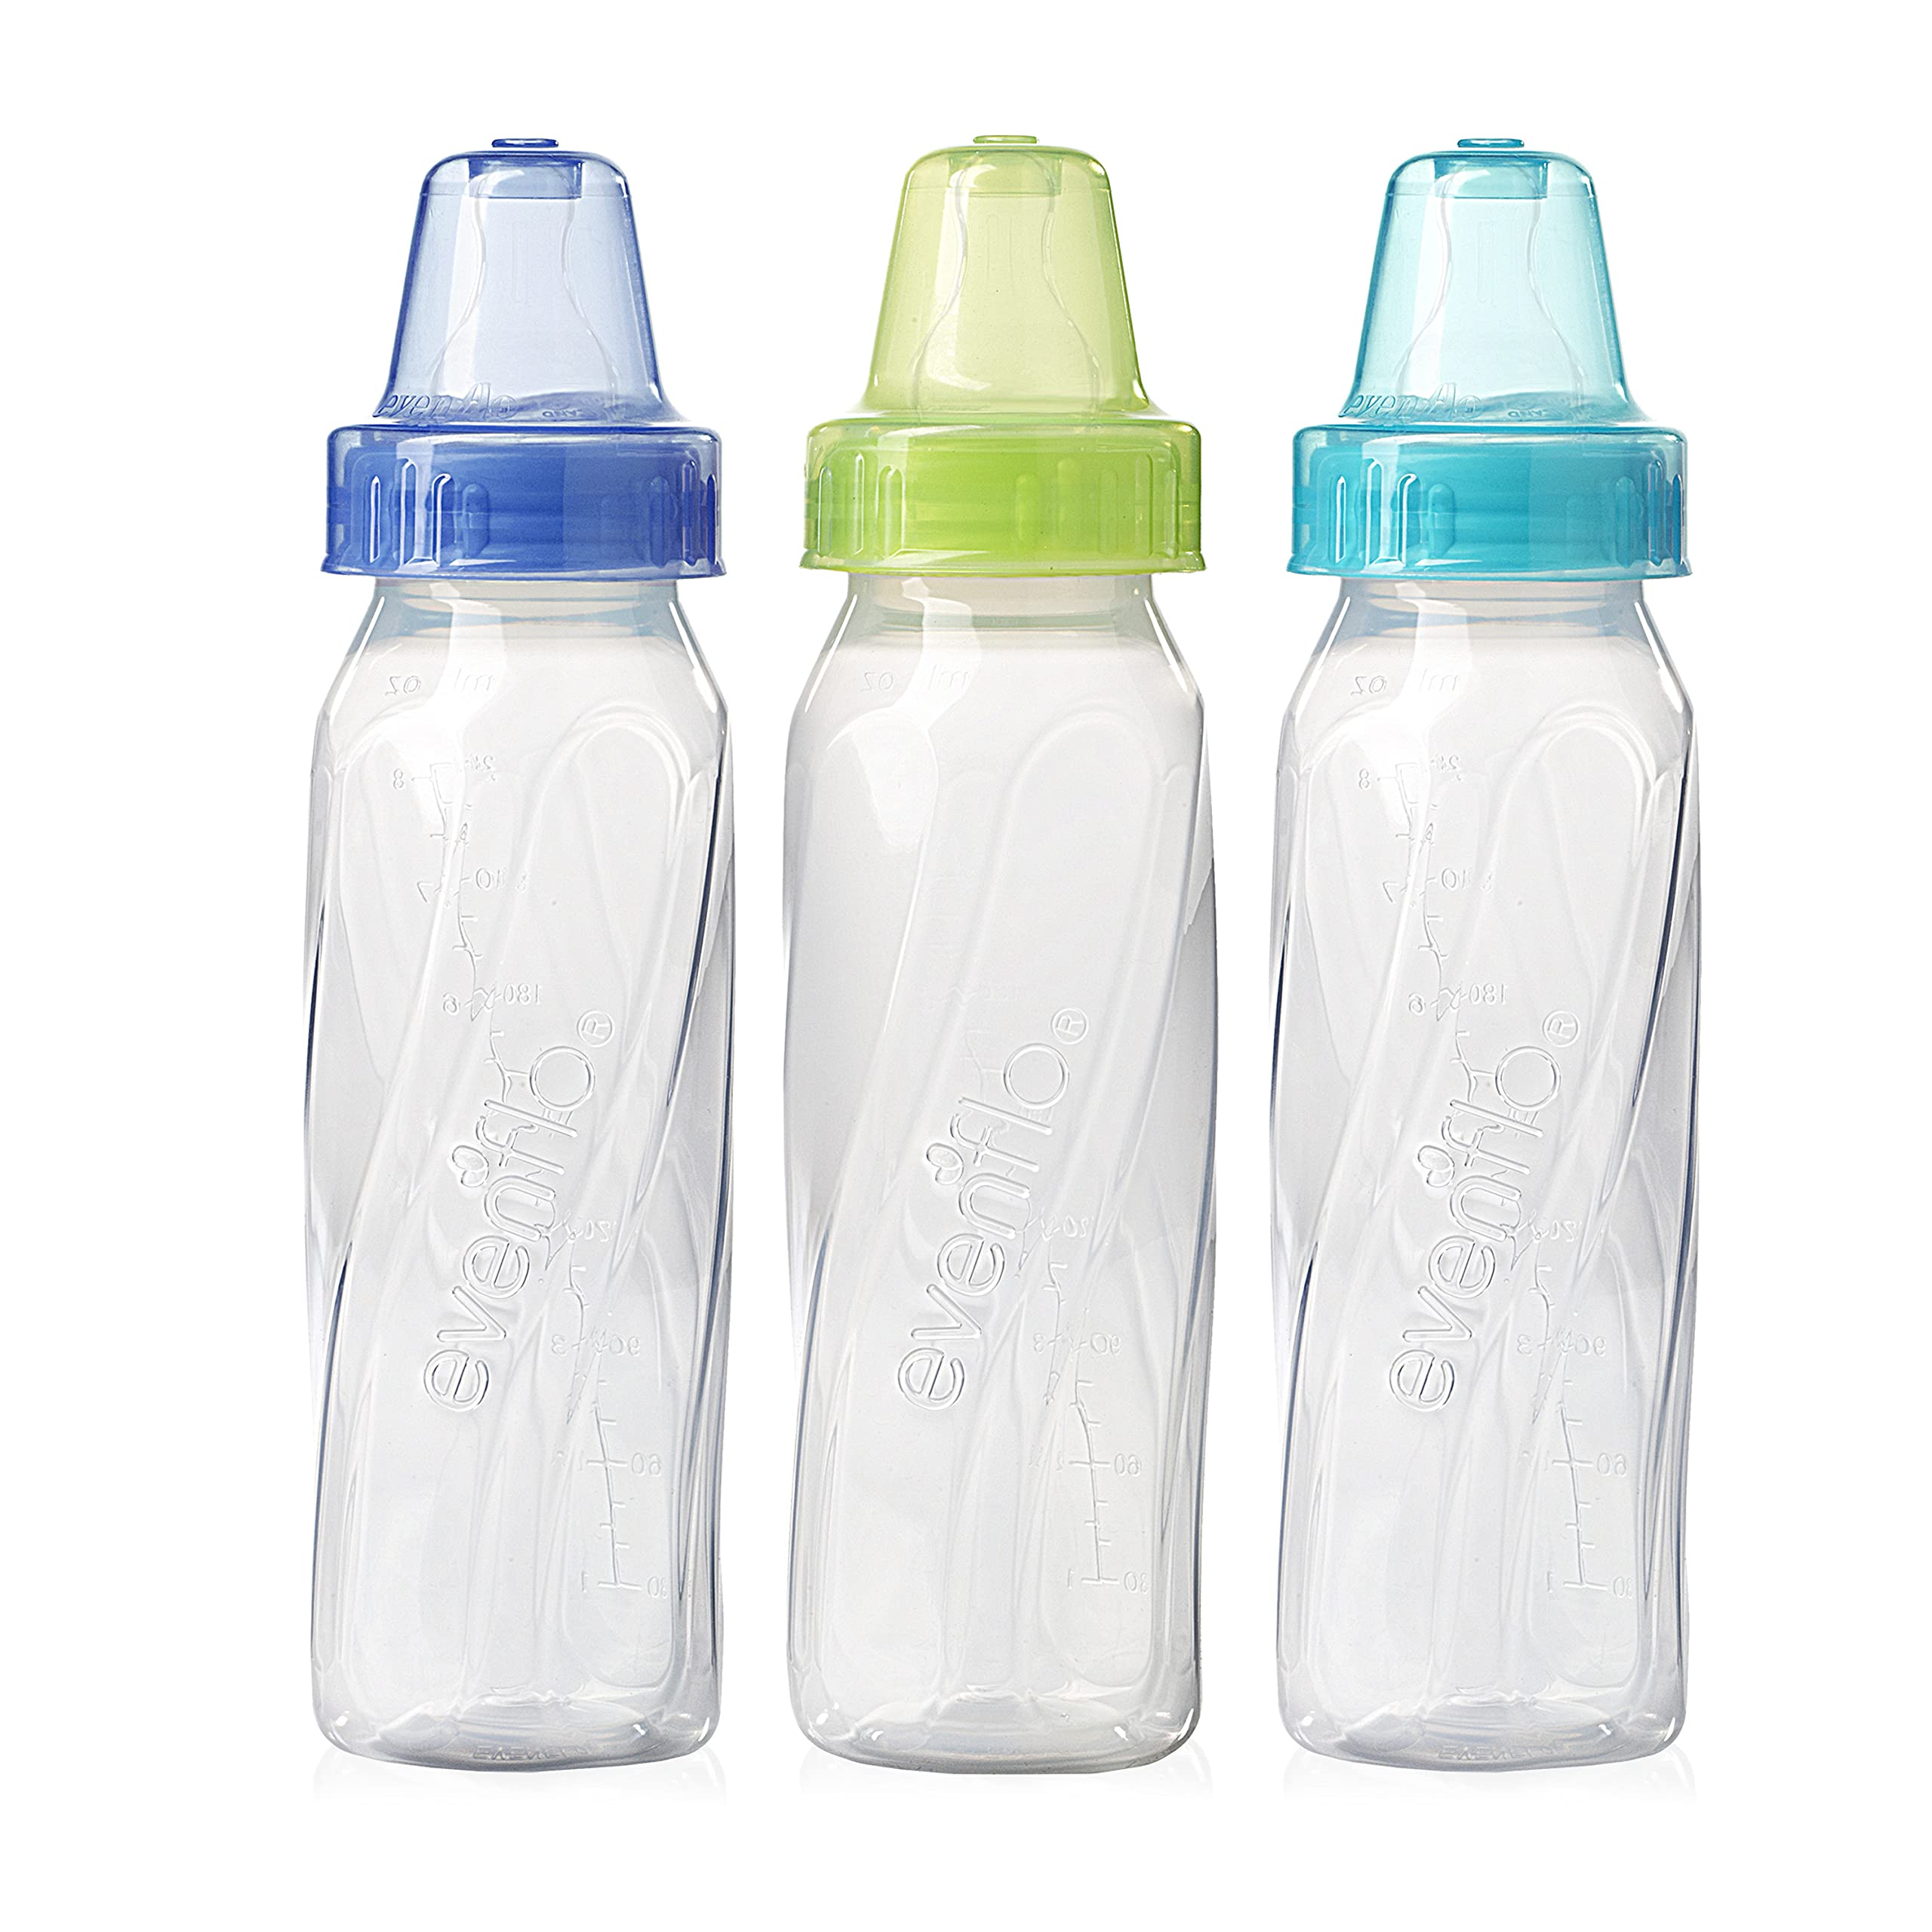 how long are plastic baby bottles good for